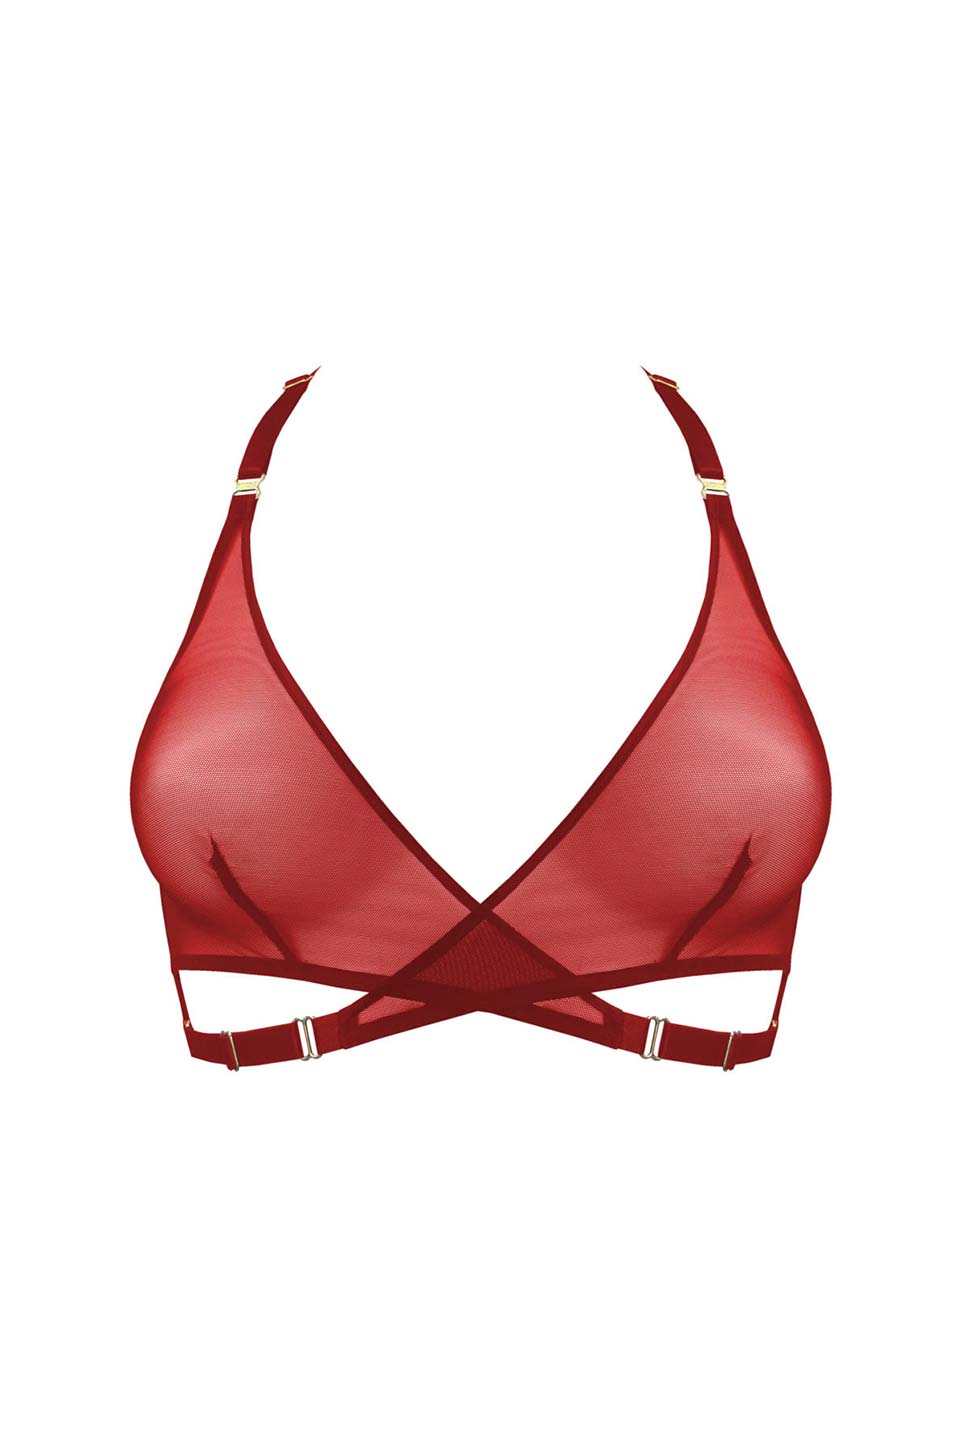 Thumbnail for Product gallery 1, Atelier Bordelle Art Deco Bra in red color front view